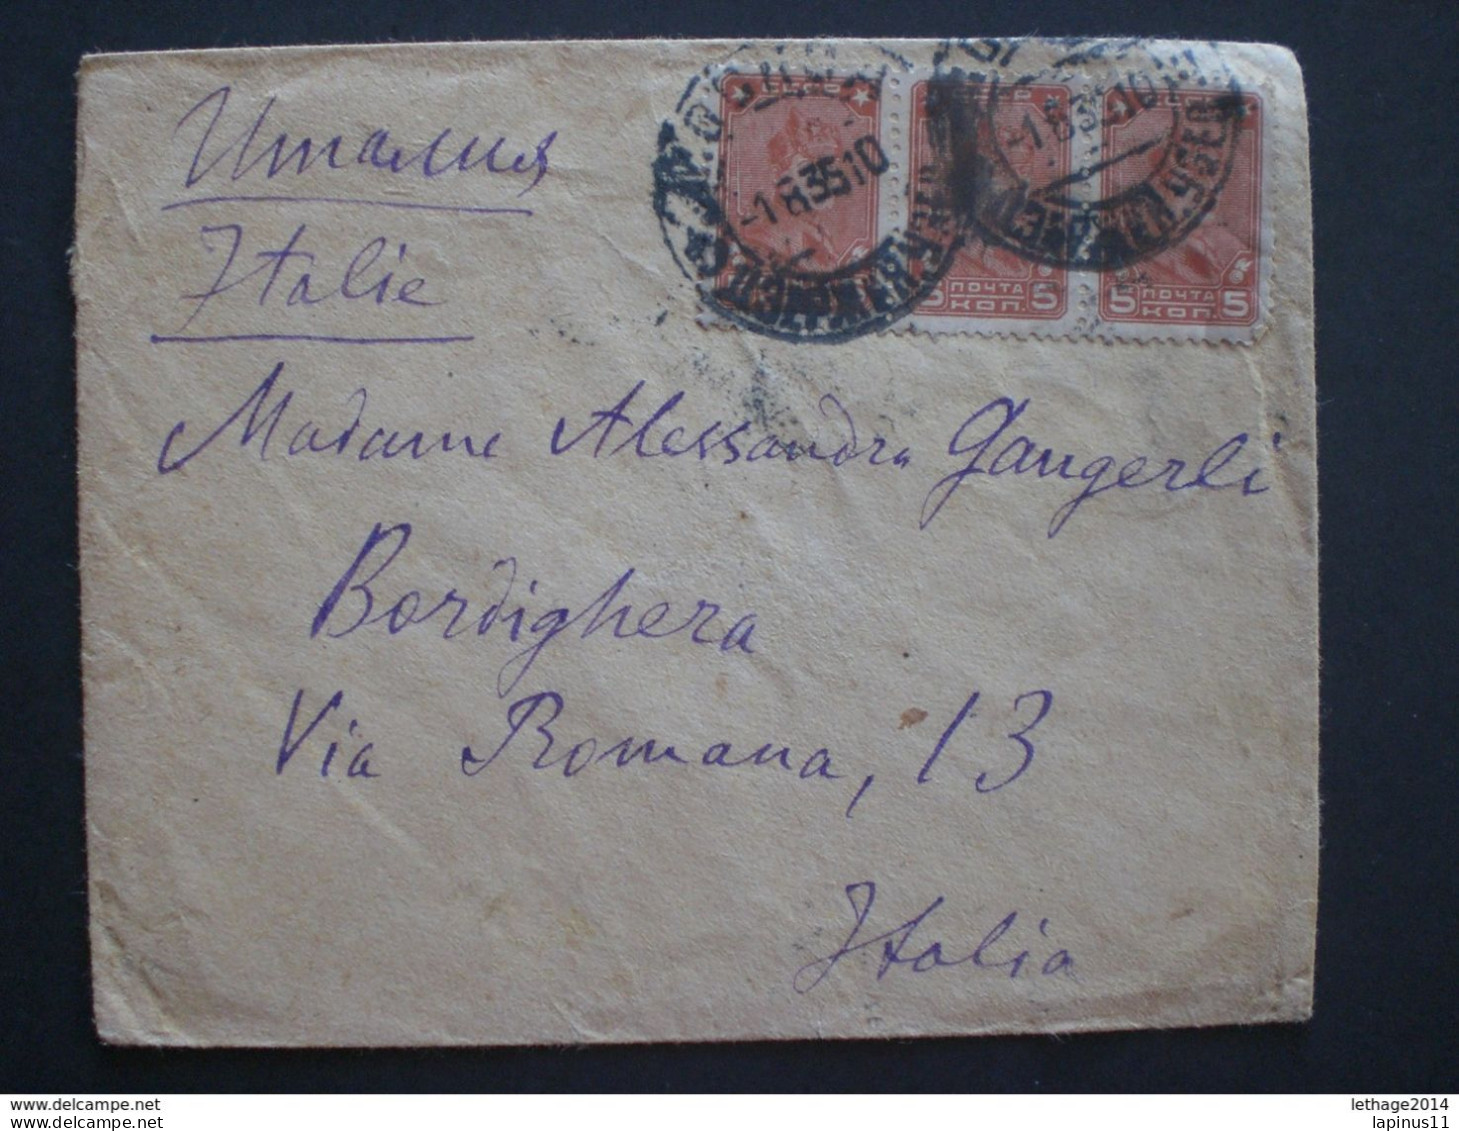 RUSSIA RUSSIE РОССИЯ STAMPS COVER 1935 Registered Mail RUSSIE TO ITALY RRR RIF.TAGG. (11) - Briefe U. Dokumente